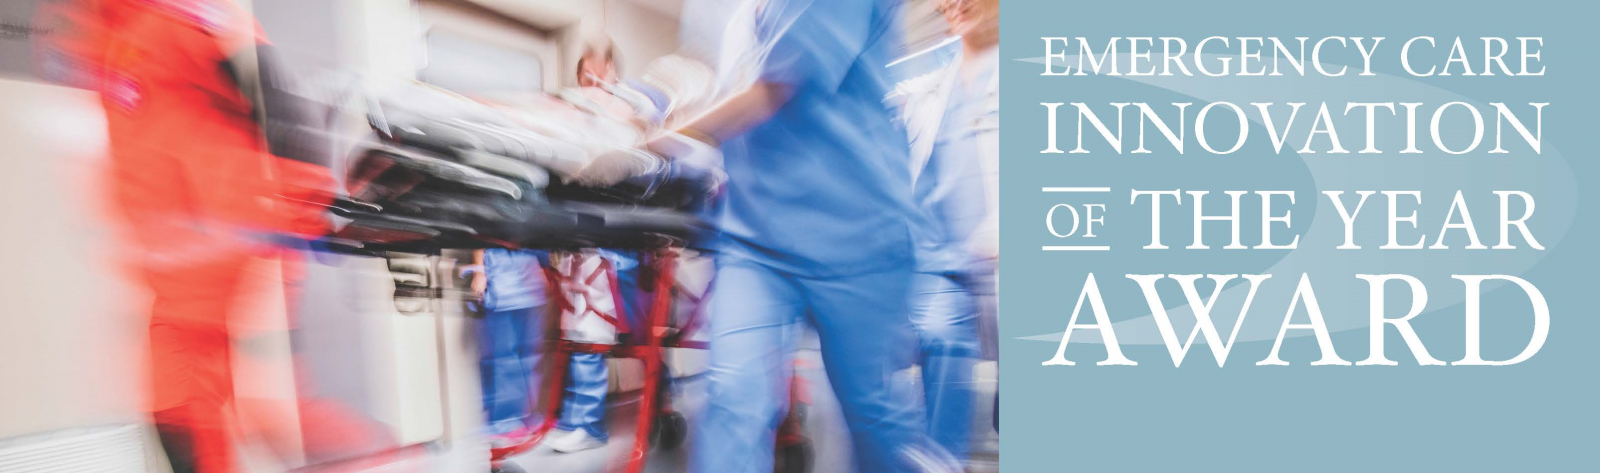 Emergency room scene in-motion, with the text "Emergency Care Innovation of the Year Award" next to it on a blue background